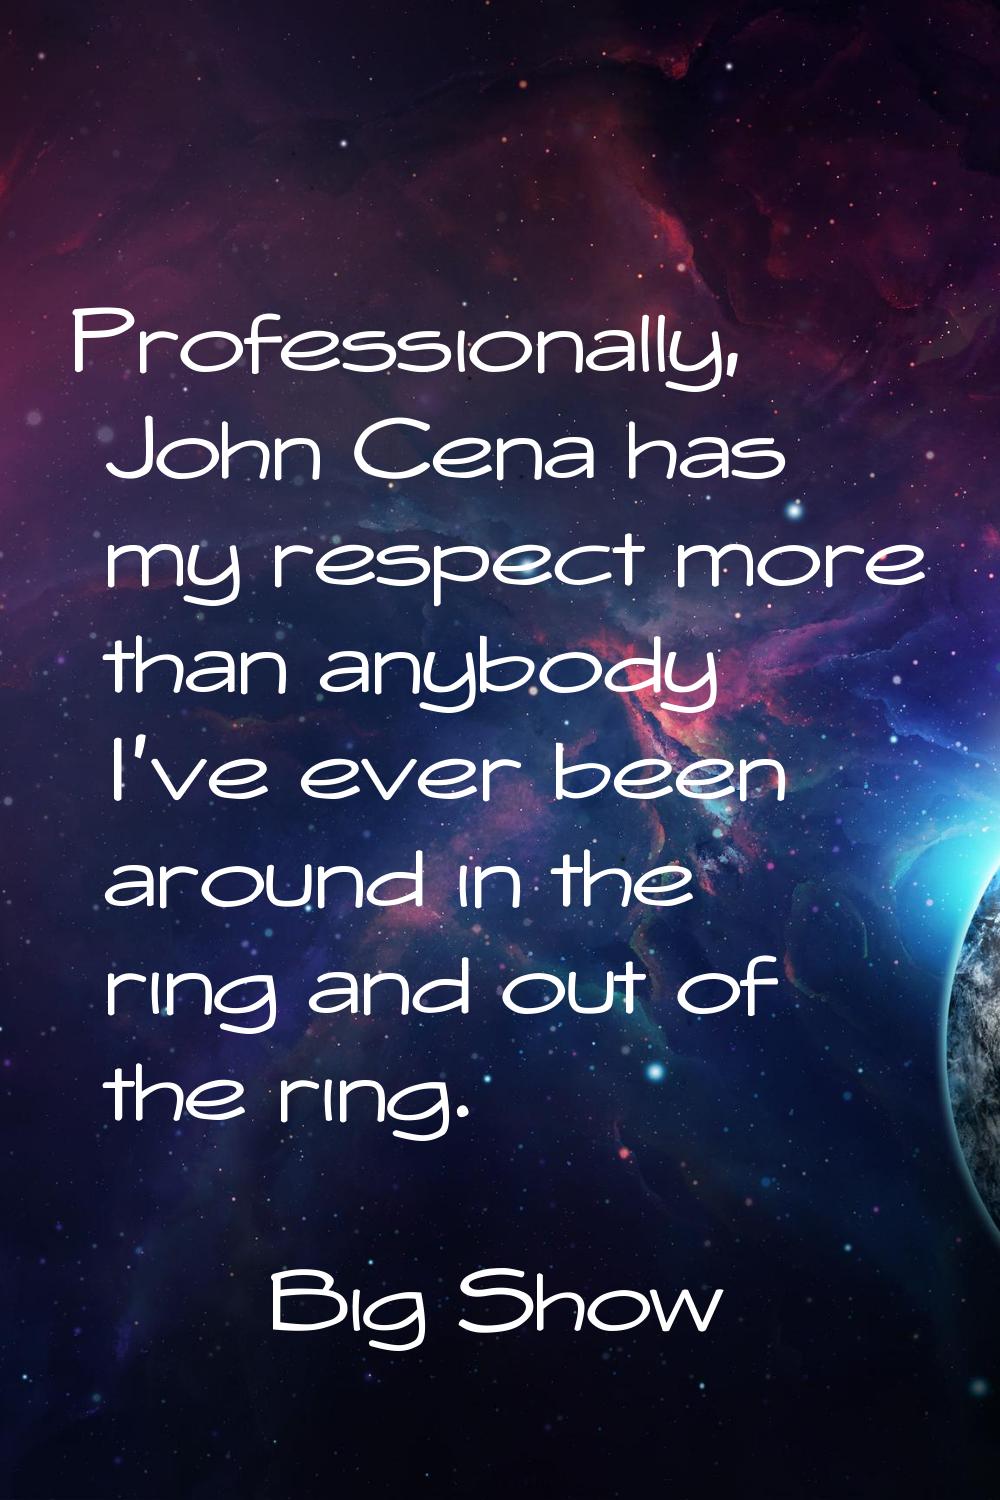 Professionally, John Cena has my respect more than anybody I've ever been around in the ring and ou